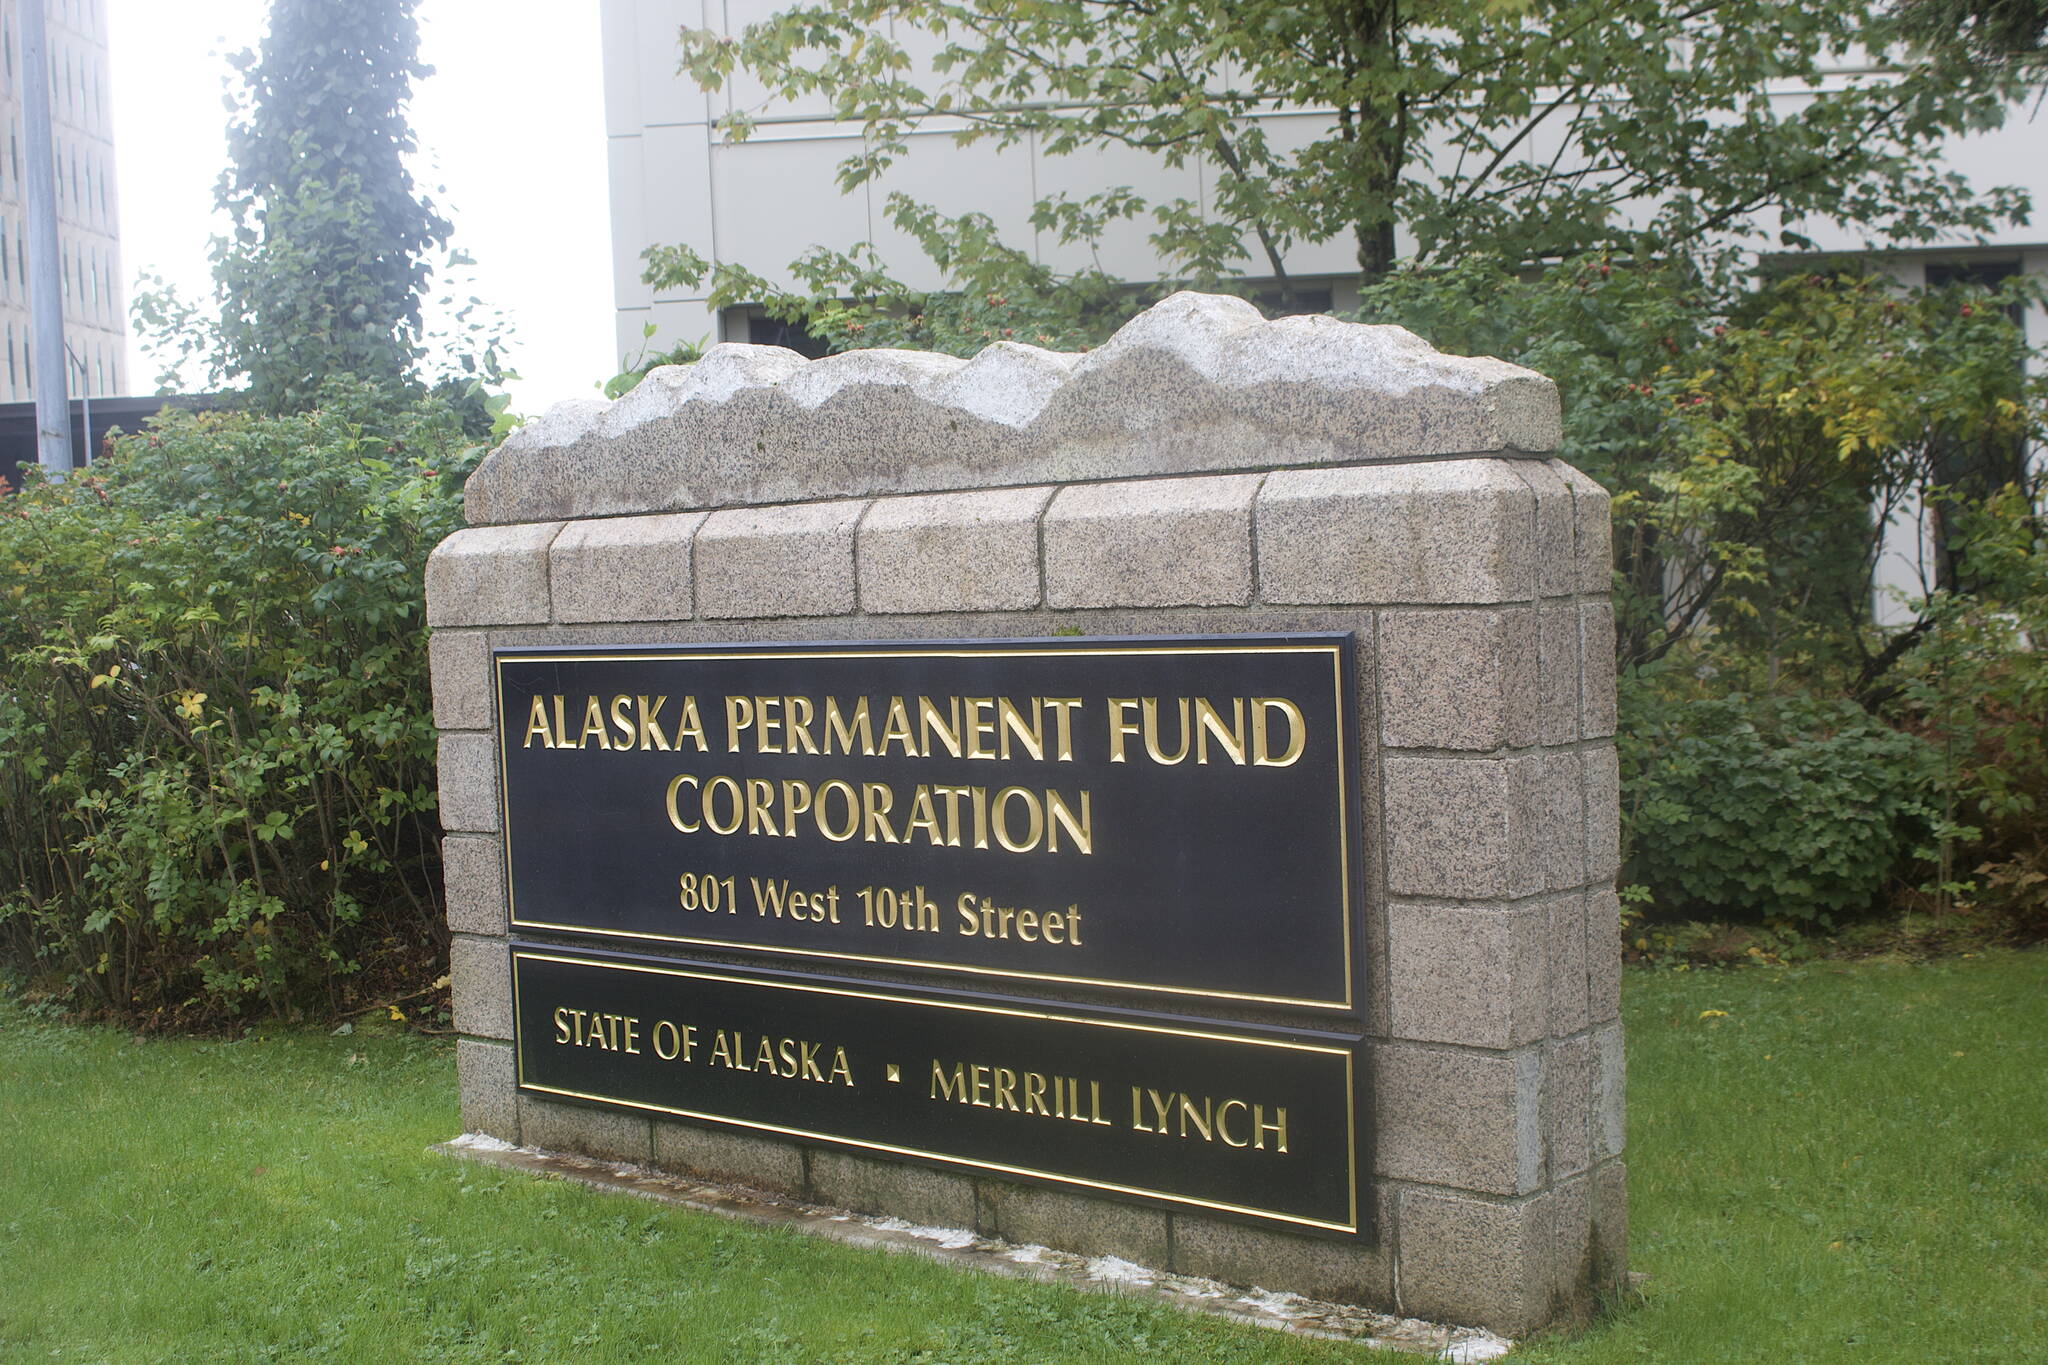 Mark Sabbatini / Juneau Empire
The Alaska Permanent Fund Corp. building in Juneau is scheduled to be the site where the board of trustees will select a new executive director on Monday, following the investigation into the firing of former CEO Angela Rodell last December being presented to state lawmakers on Wednesday.